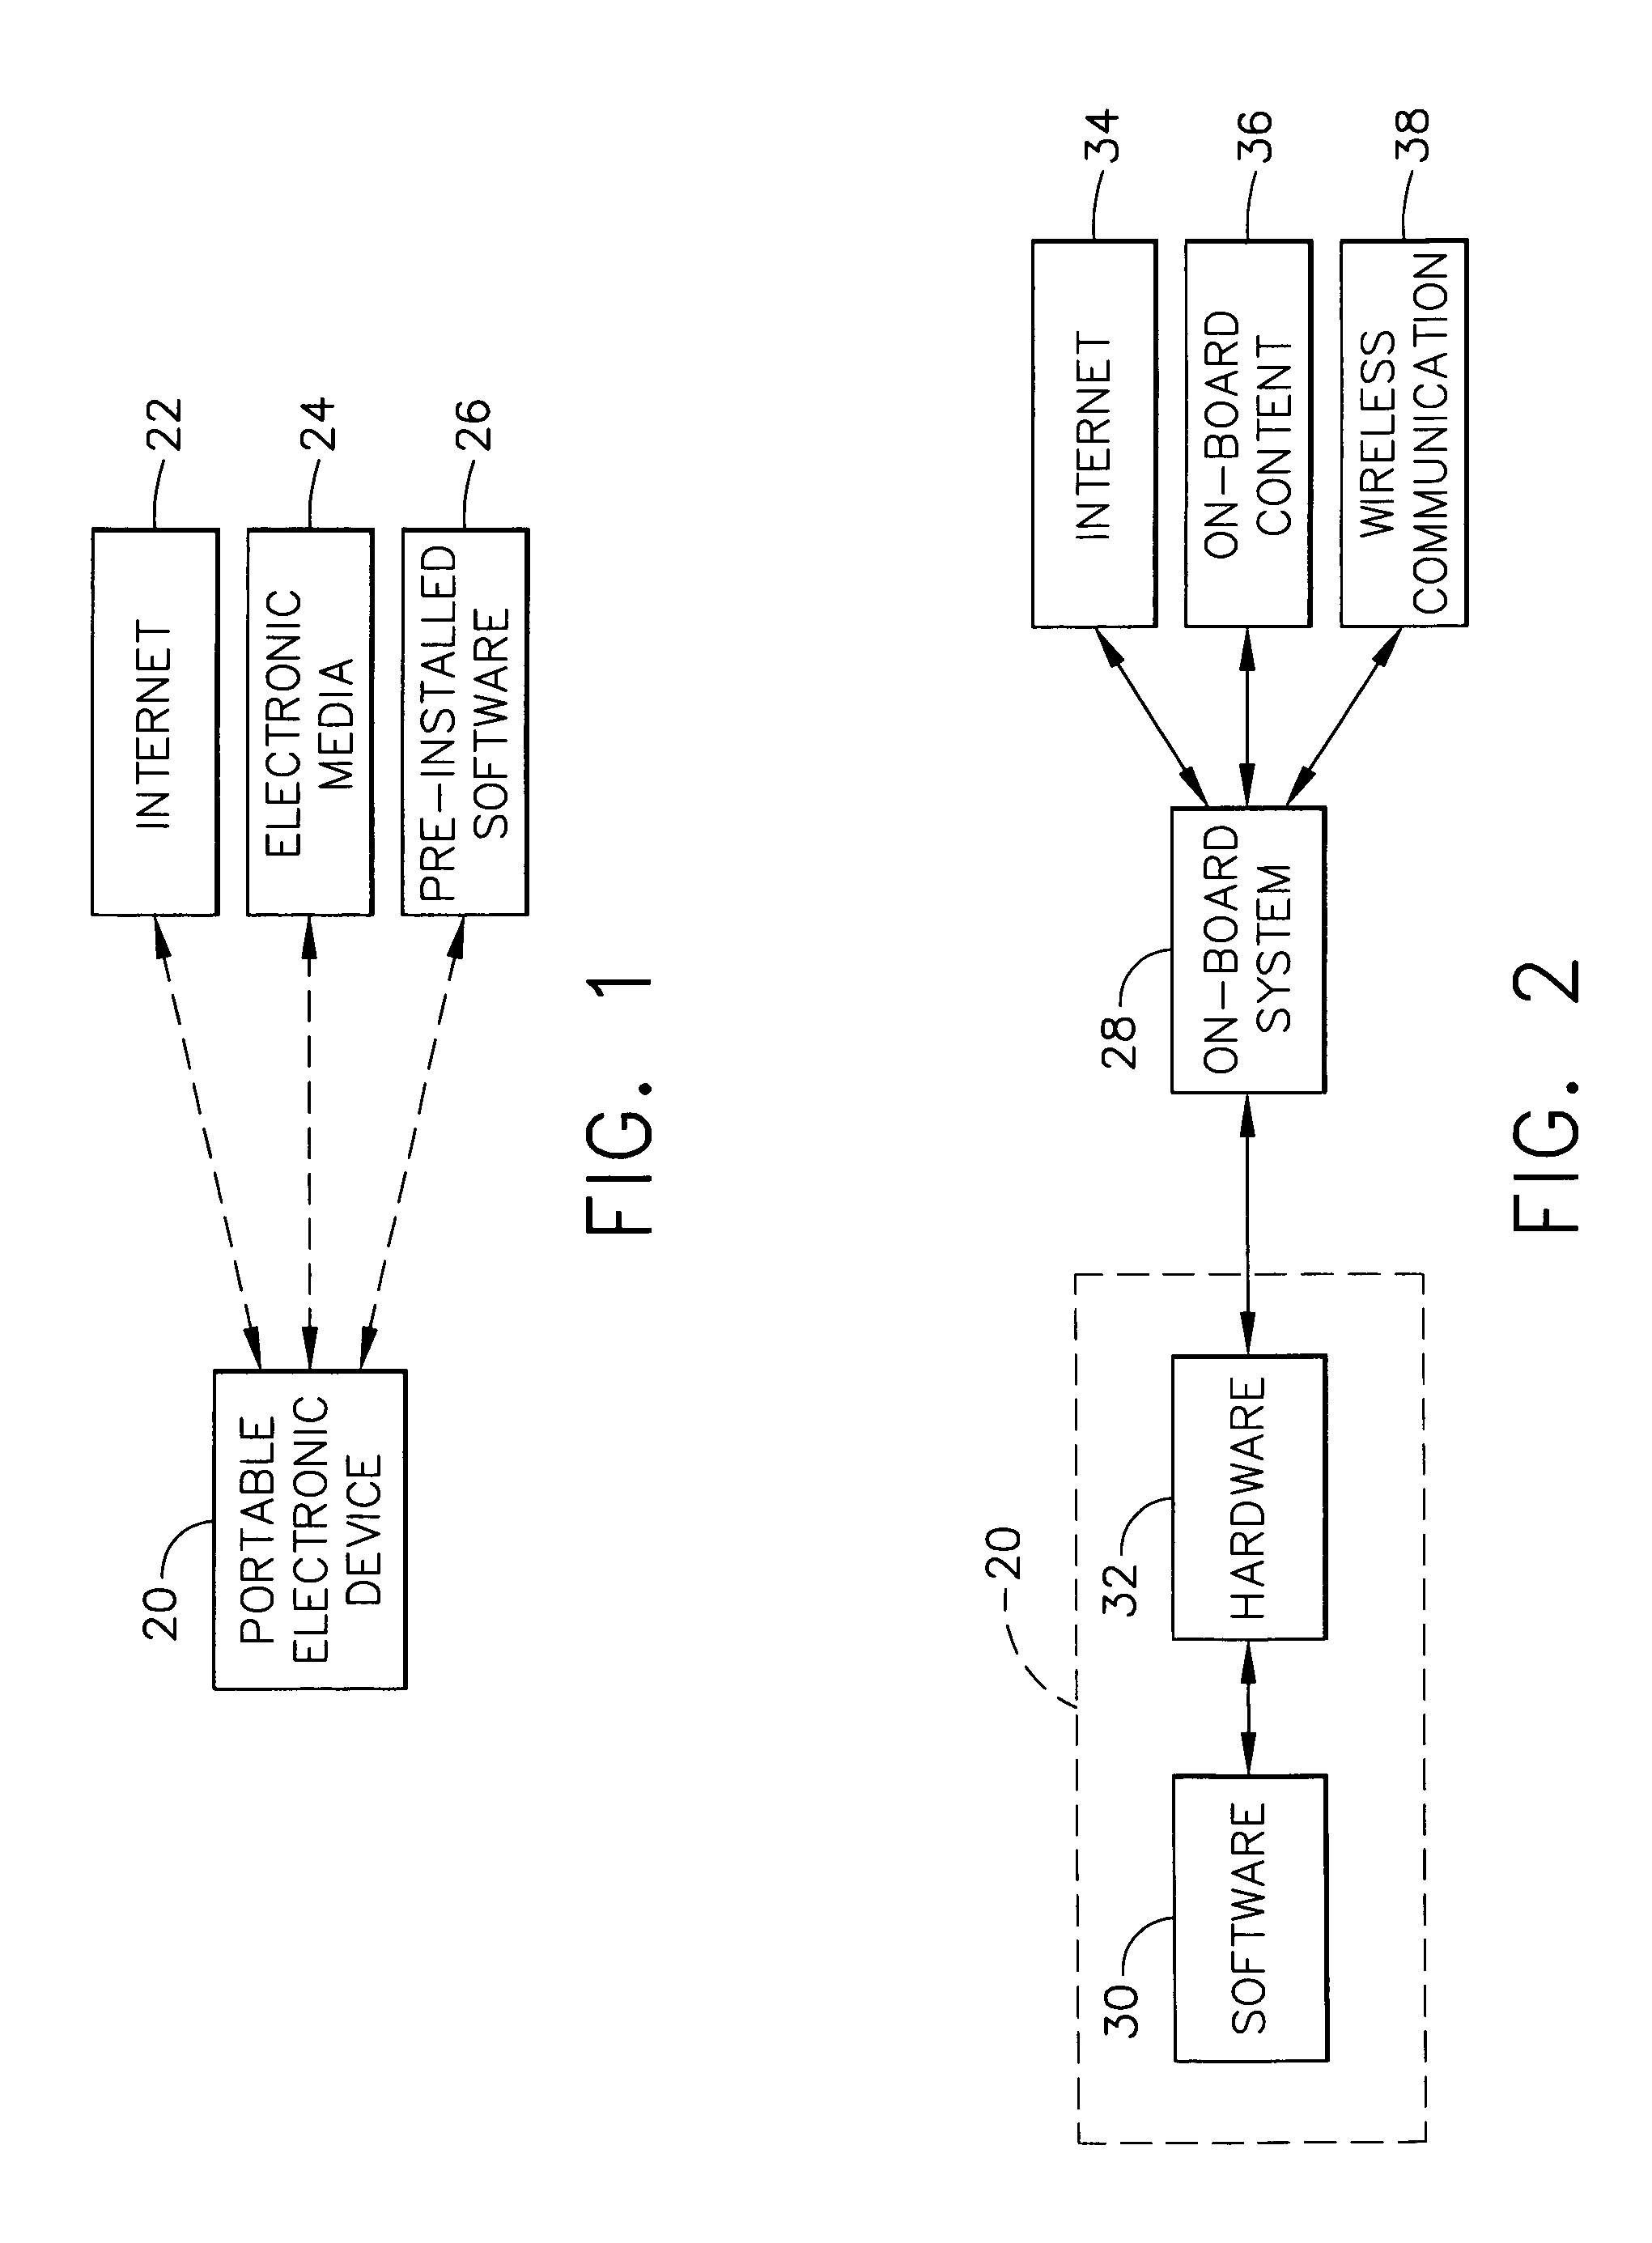 Mobile apparatus for configuring portable devices to be used on-board mobile platforms